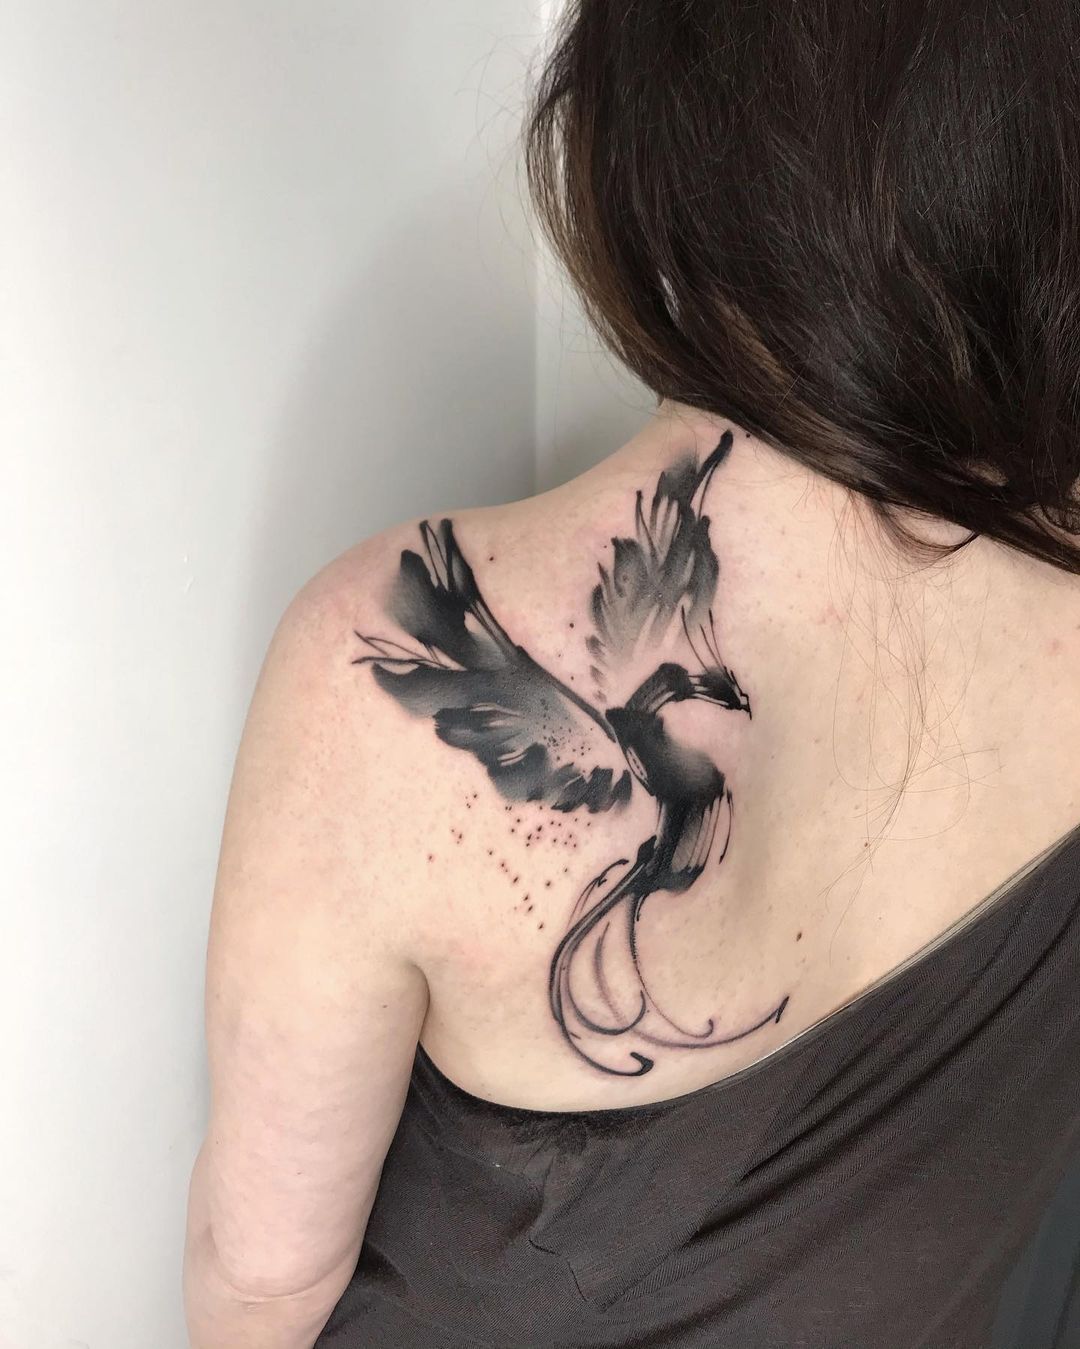 Tattoo uploaded by Andy Potter • Crows and Blossoms • Tattoodo